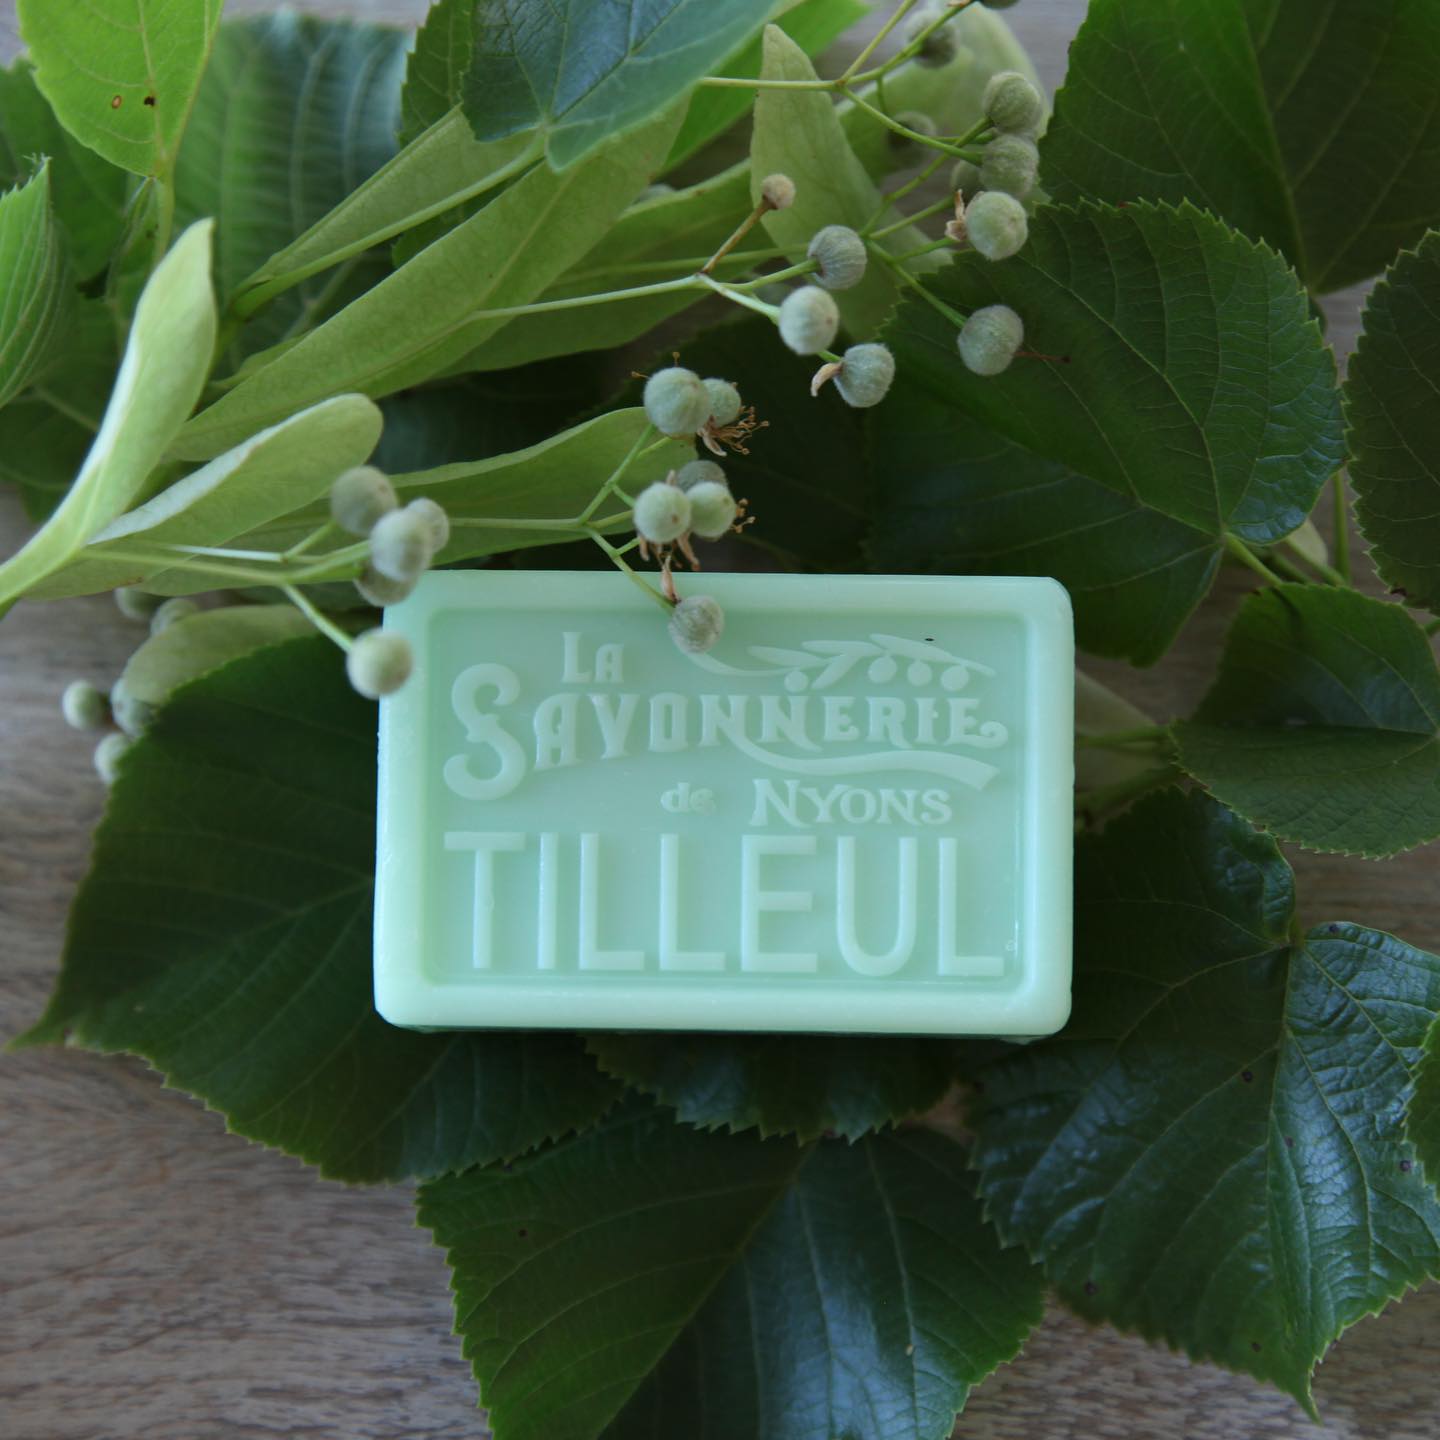 Green bar of soap that reads La Savonnerie de Nyons Tilleul surrounded by leaves.